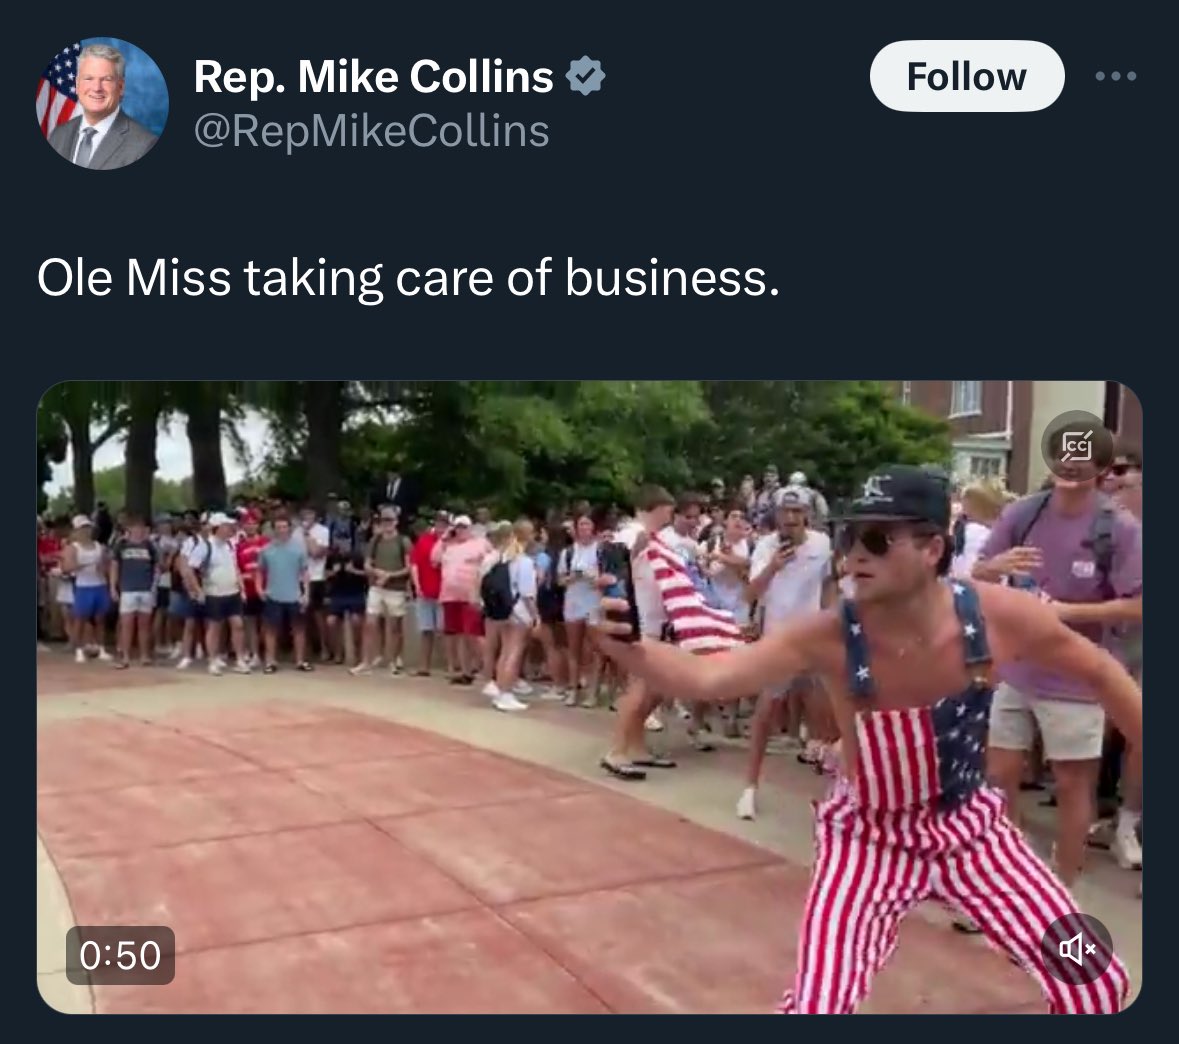 Of course a sitting member of Congress, @RepMikeCollins, from Georgia just tweeted his support for the racist frat bros from Ole Miss